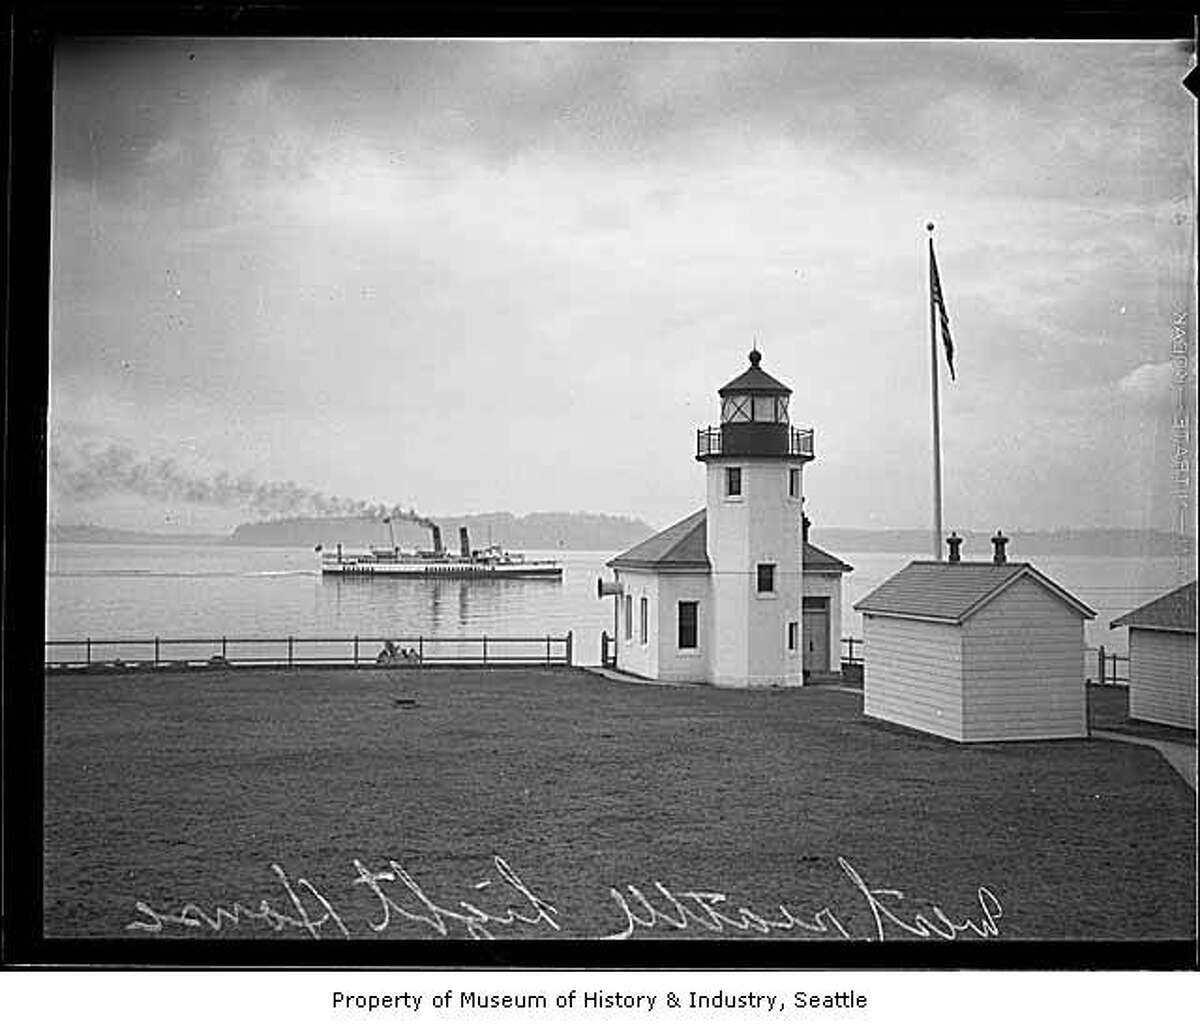 "The point of land originally known as Sma-Qua-mooks and Point Roberts was low and hard to see from a ship, so the need for a guiding light became evident. By 1858, the place was called Battery Point, and a single kerosene lantern was hung on the lonely shore by members of Hans Hanson's family. In 1887, the U.S. Lighthouse Service recognized the need for a stronger light, so they took over the task and erected a 10-foot brass post lantern. A new lighthouse station, including a small stucco building with a brick tower at the end of the point, began operating in 1913. The structure remains today." -MOHAI. Photo, dated 1931, courtesy MOHAI, Seattle P-I Collection, image number 1986.5.7176.1.